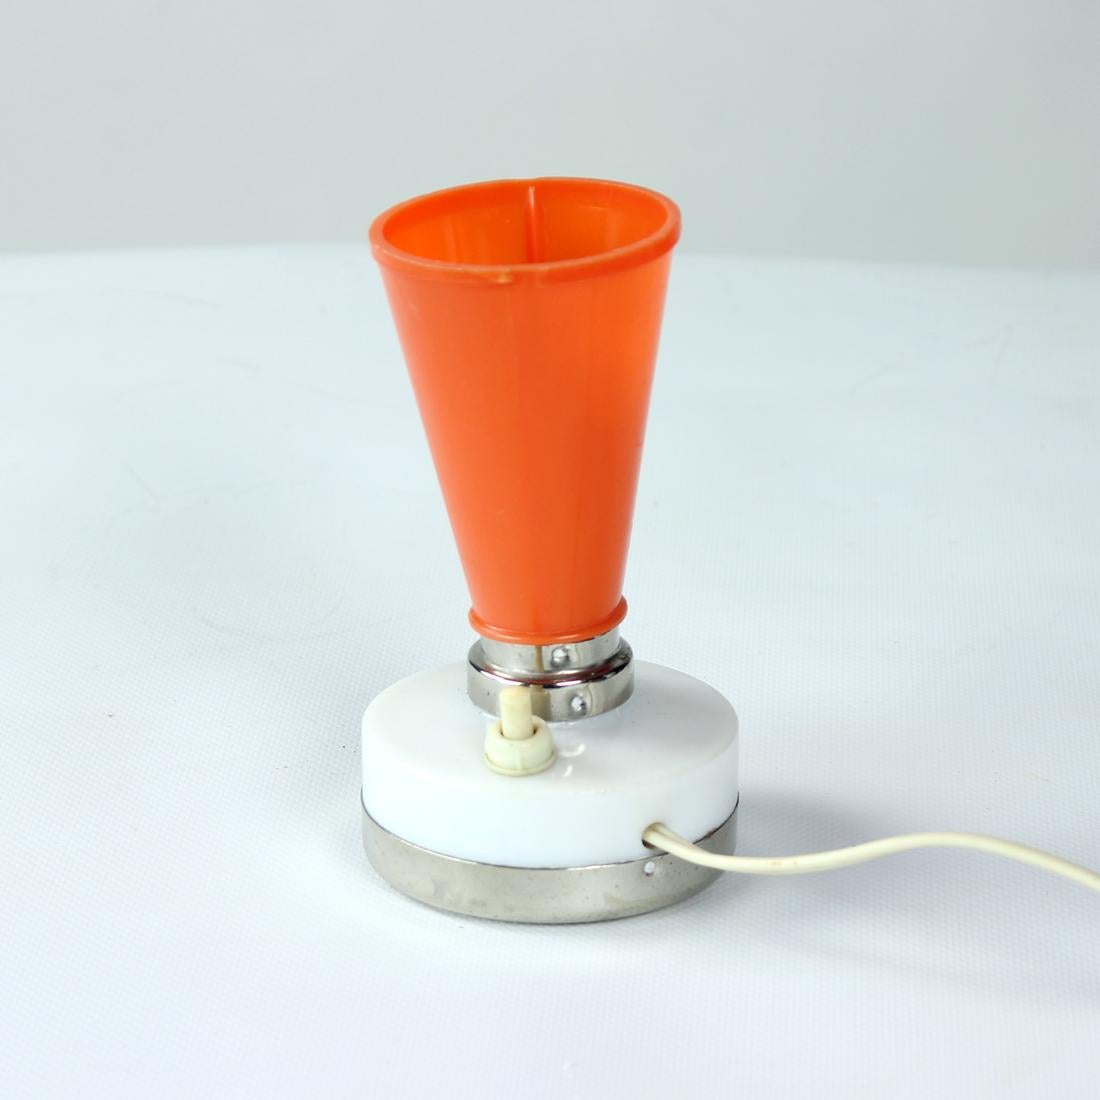 Beautiful, small table lamp, ideal for a mood light. Produced in Czechoslovakia in 1960s. The lamp combines the mid-century love with plastic and exciting design. The orange shield is made of plastic. The lamp works on one small bulb and is fully